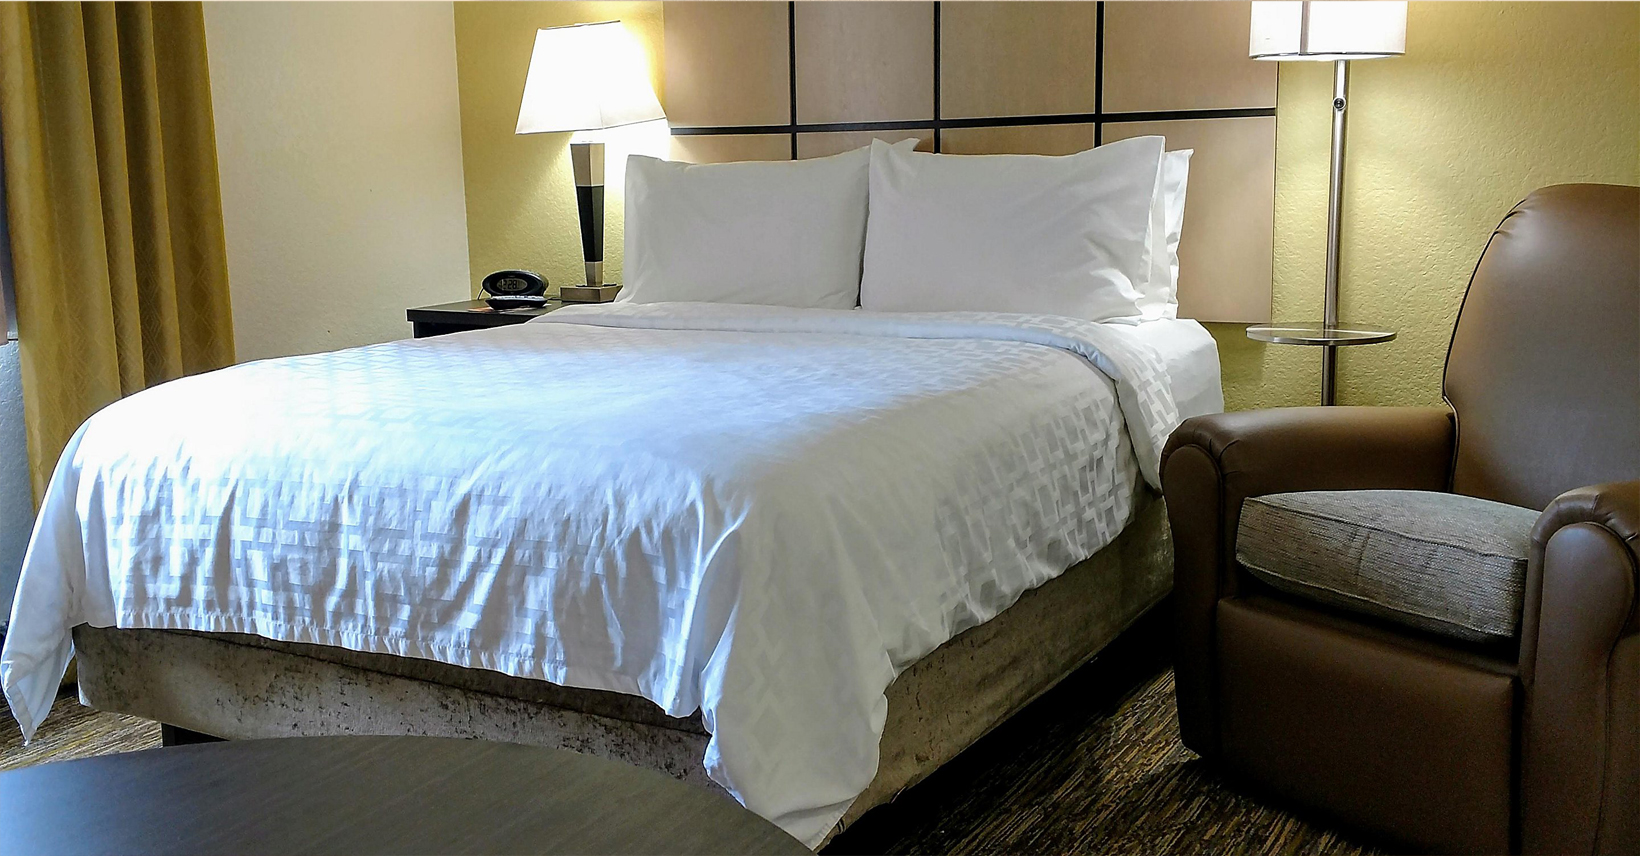 Candlewood Suites Olive Branch (Memphis Area)